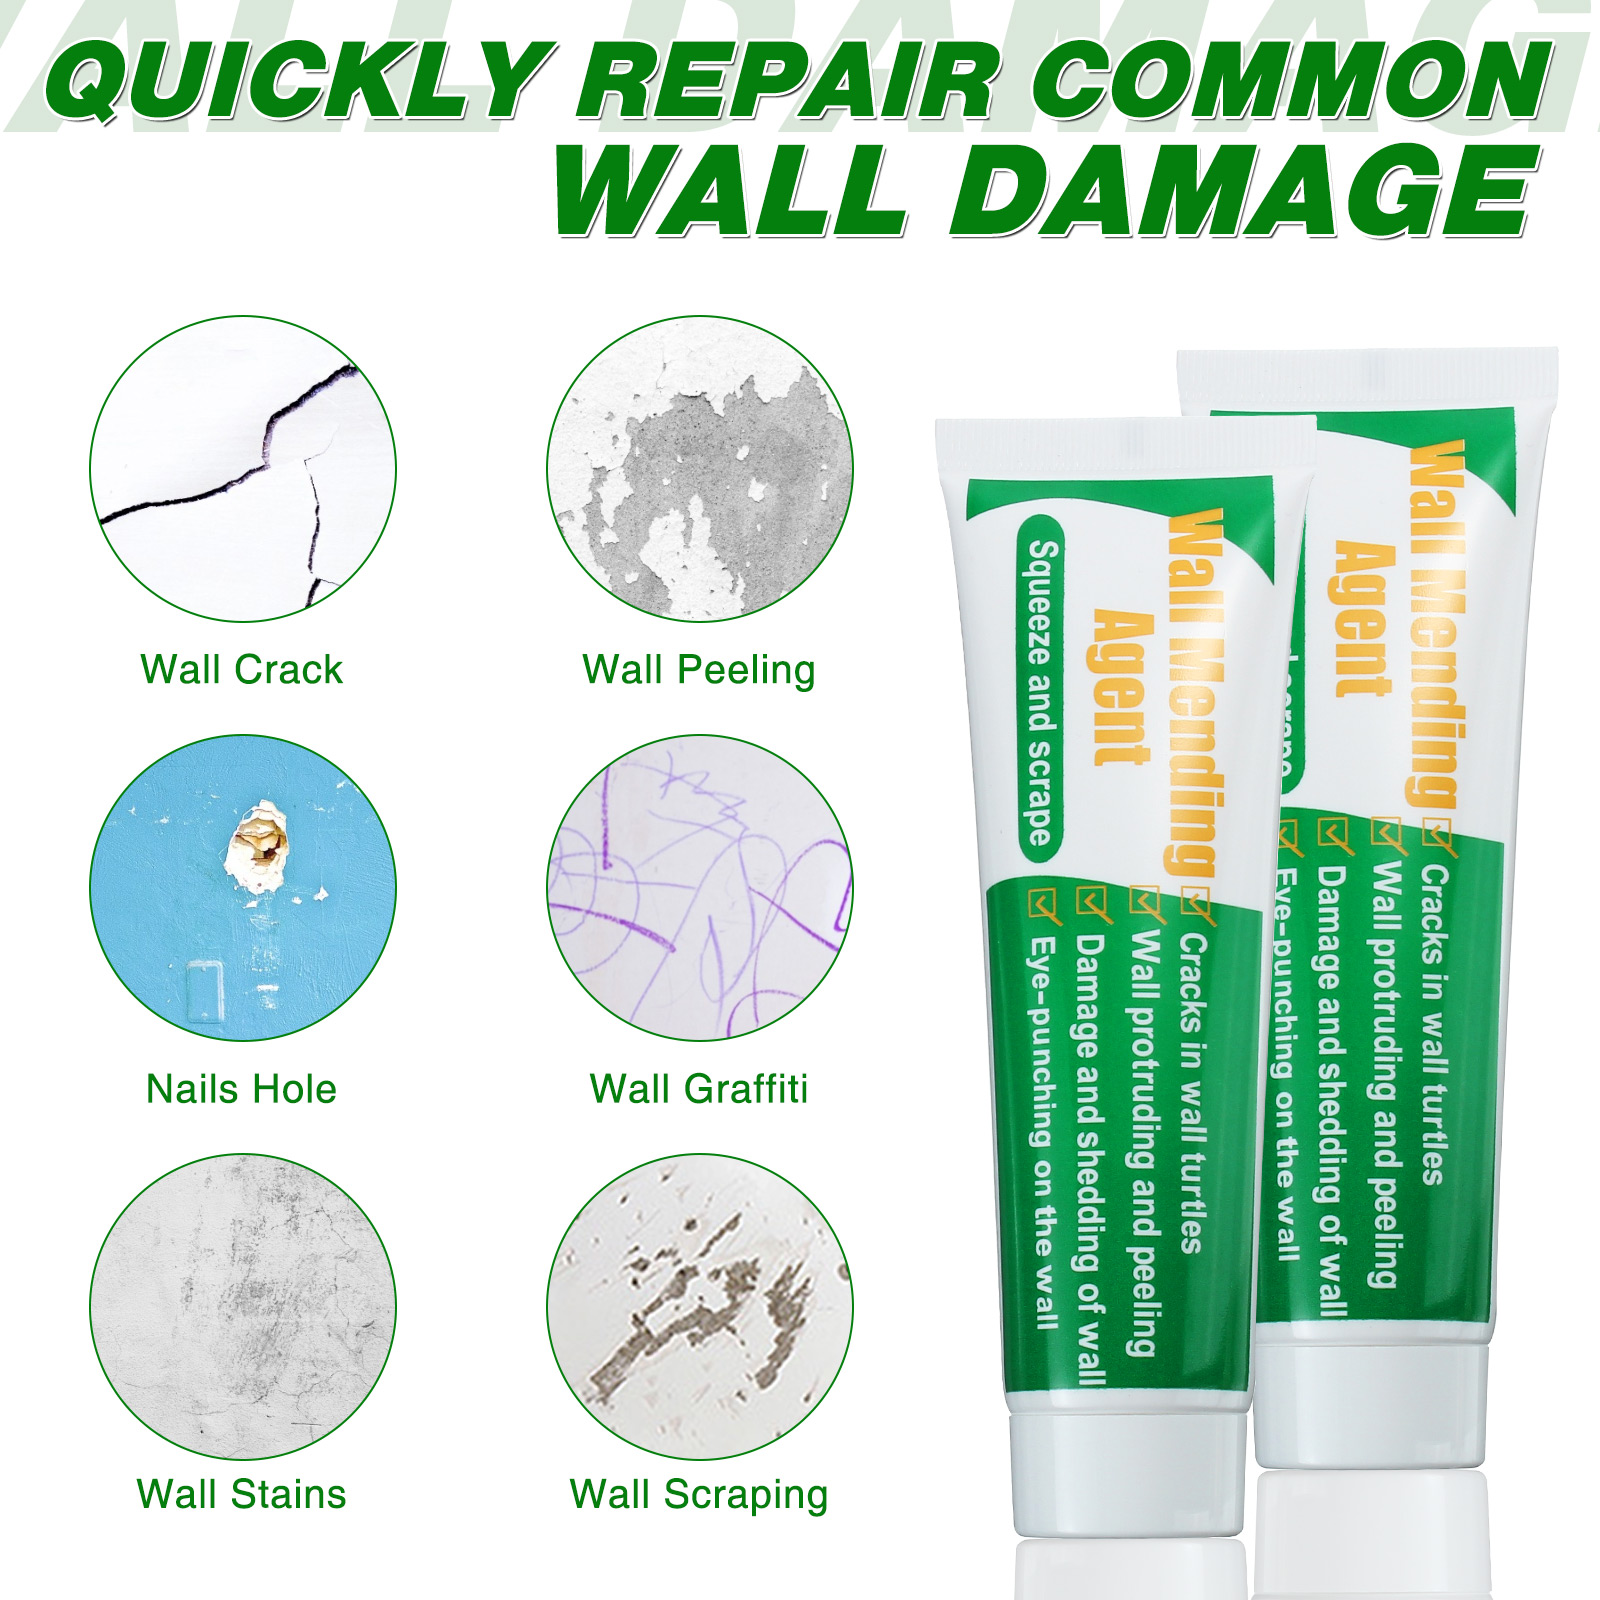 CAMTOA-Environmental-Freiendly-Waterproof-Wall-Mending-Agent-Easy-to-Use-Safety-Wall-Repair-Cream-1890537-3